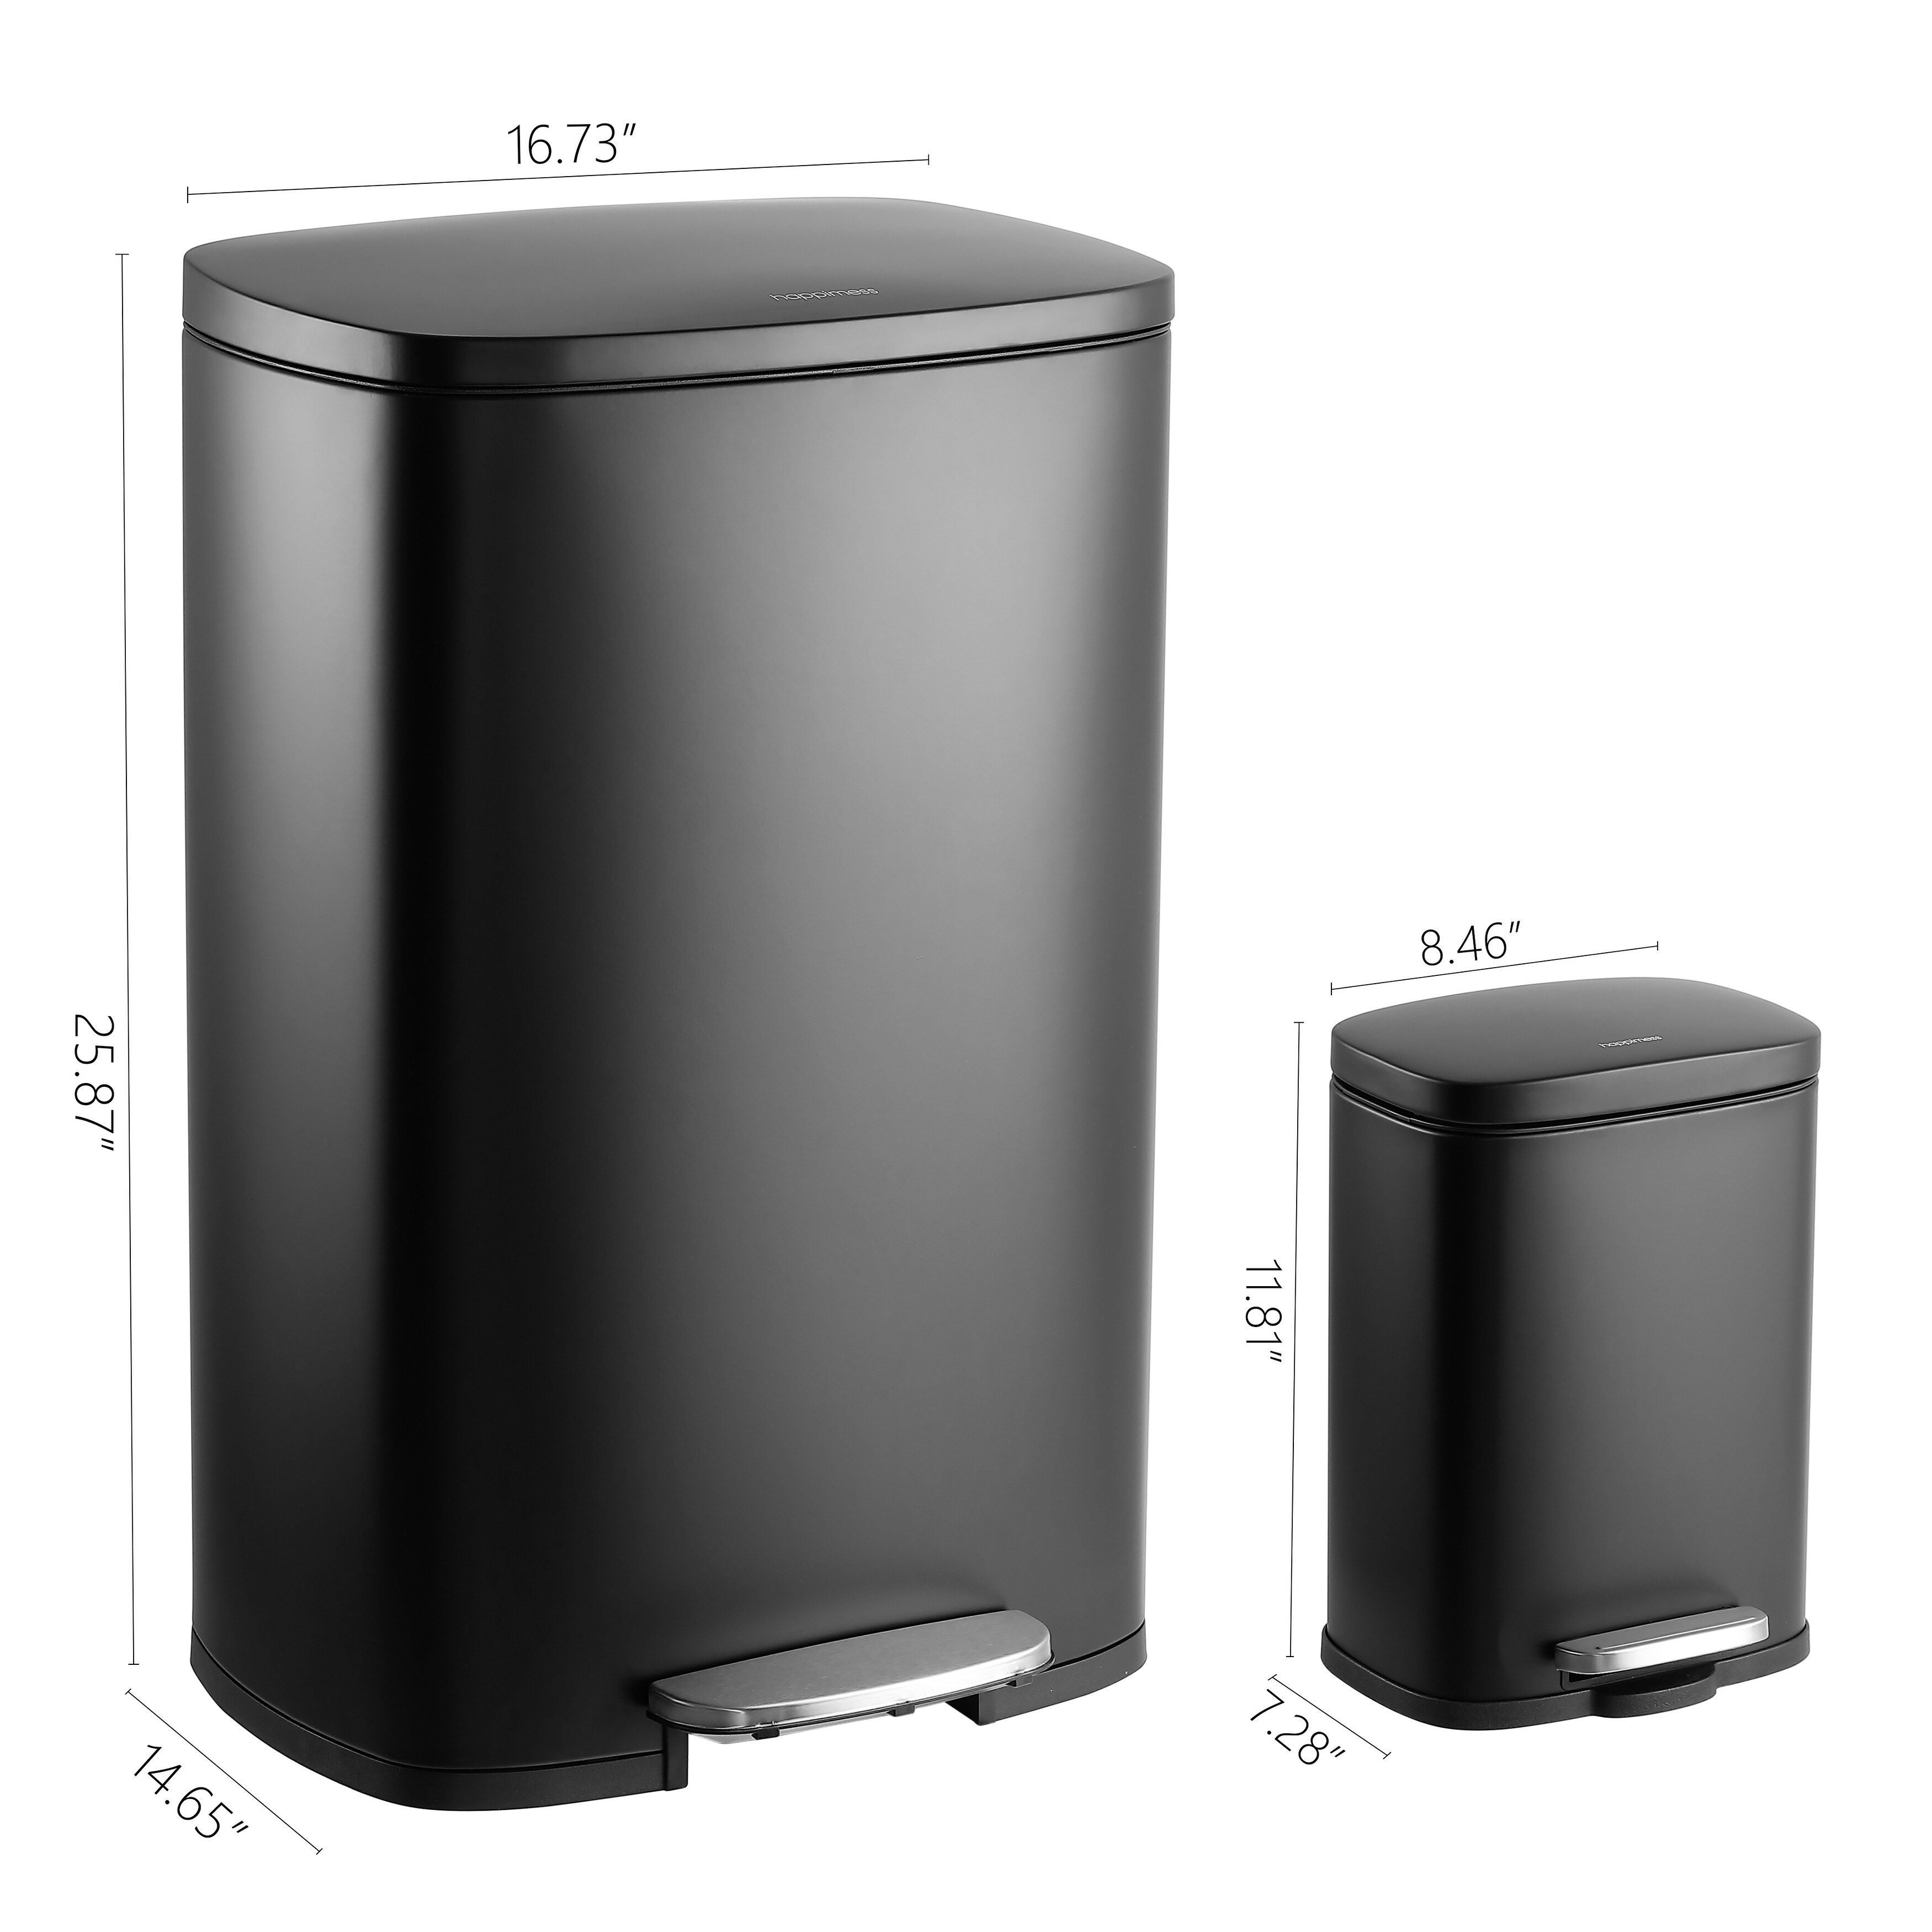 https://ak1.ostkcdn.com/images/products/is/images/direct/409e5c7c93d1750b07f5d5b820ea704feba5e20c/happimess-Connor-Rectangular-13-Gallon-Trash-Can-with-Soft-Close-Lid-and-FREE-Mini-Trash-Can.jpg